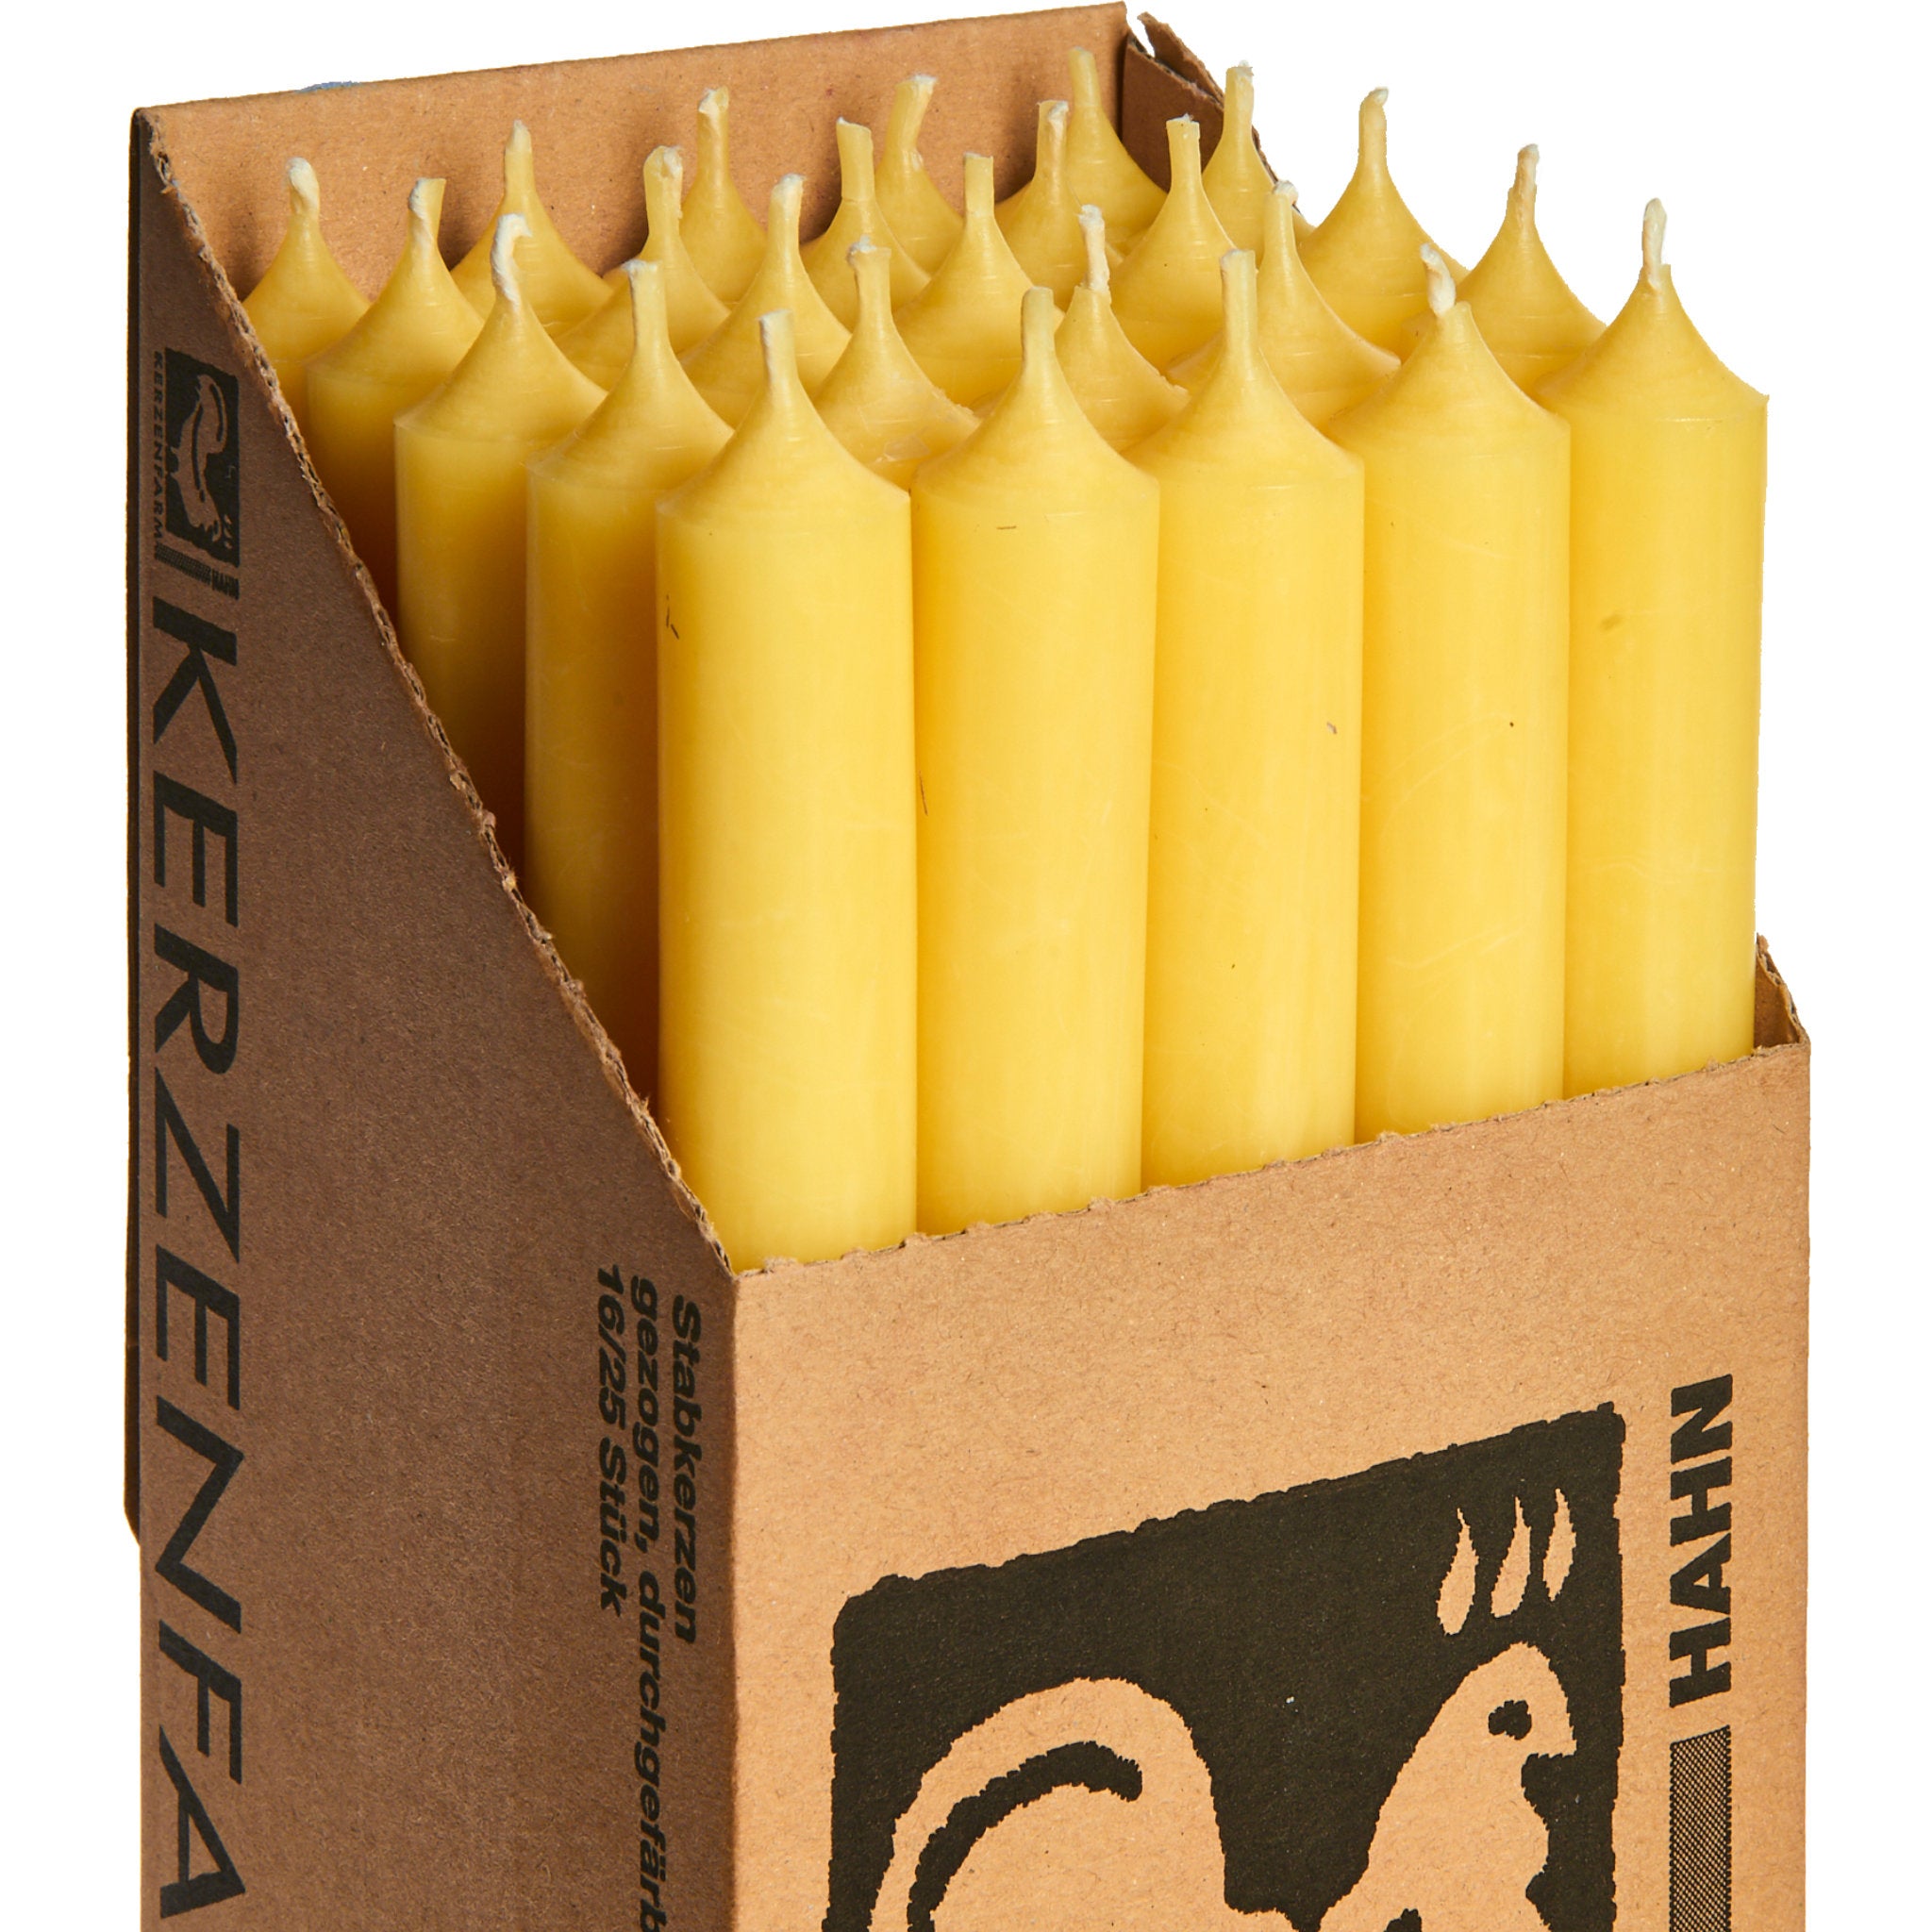 Dinner Candles, Tall Box of 25